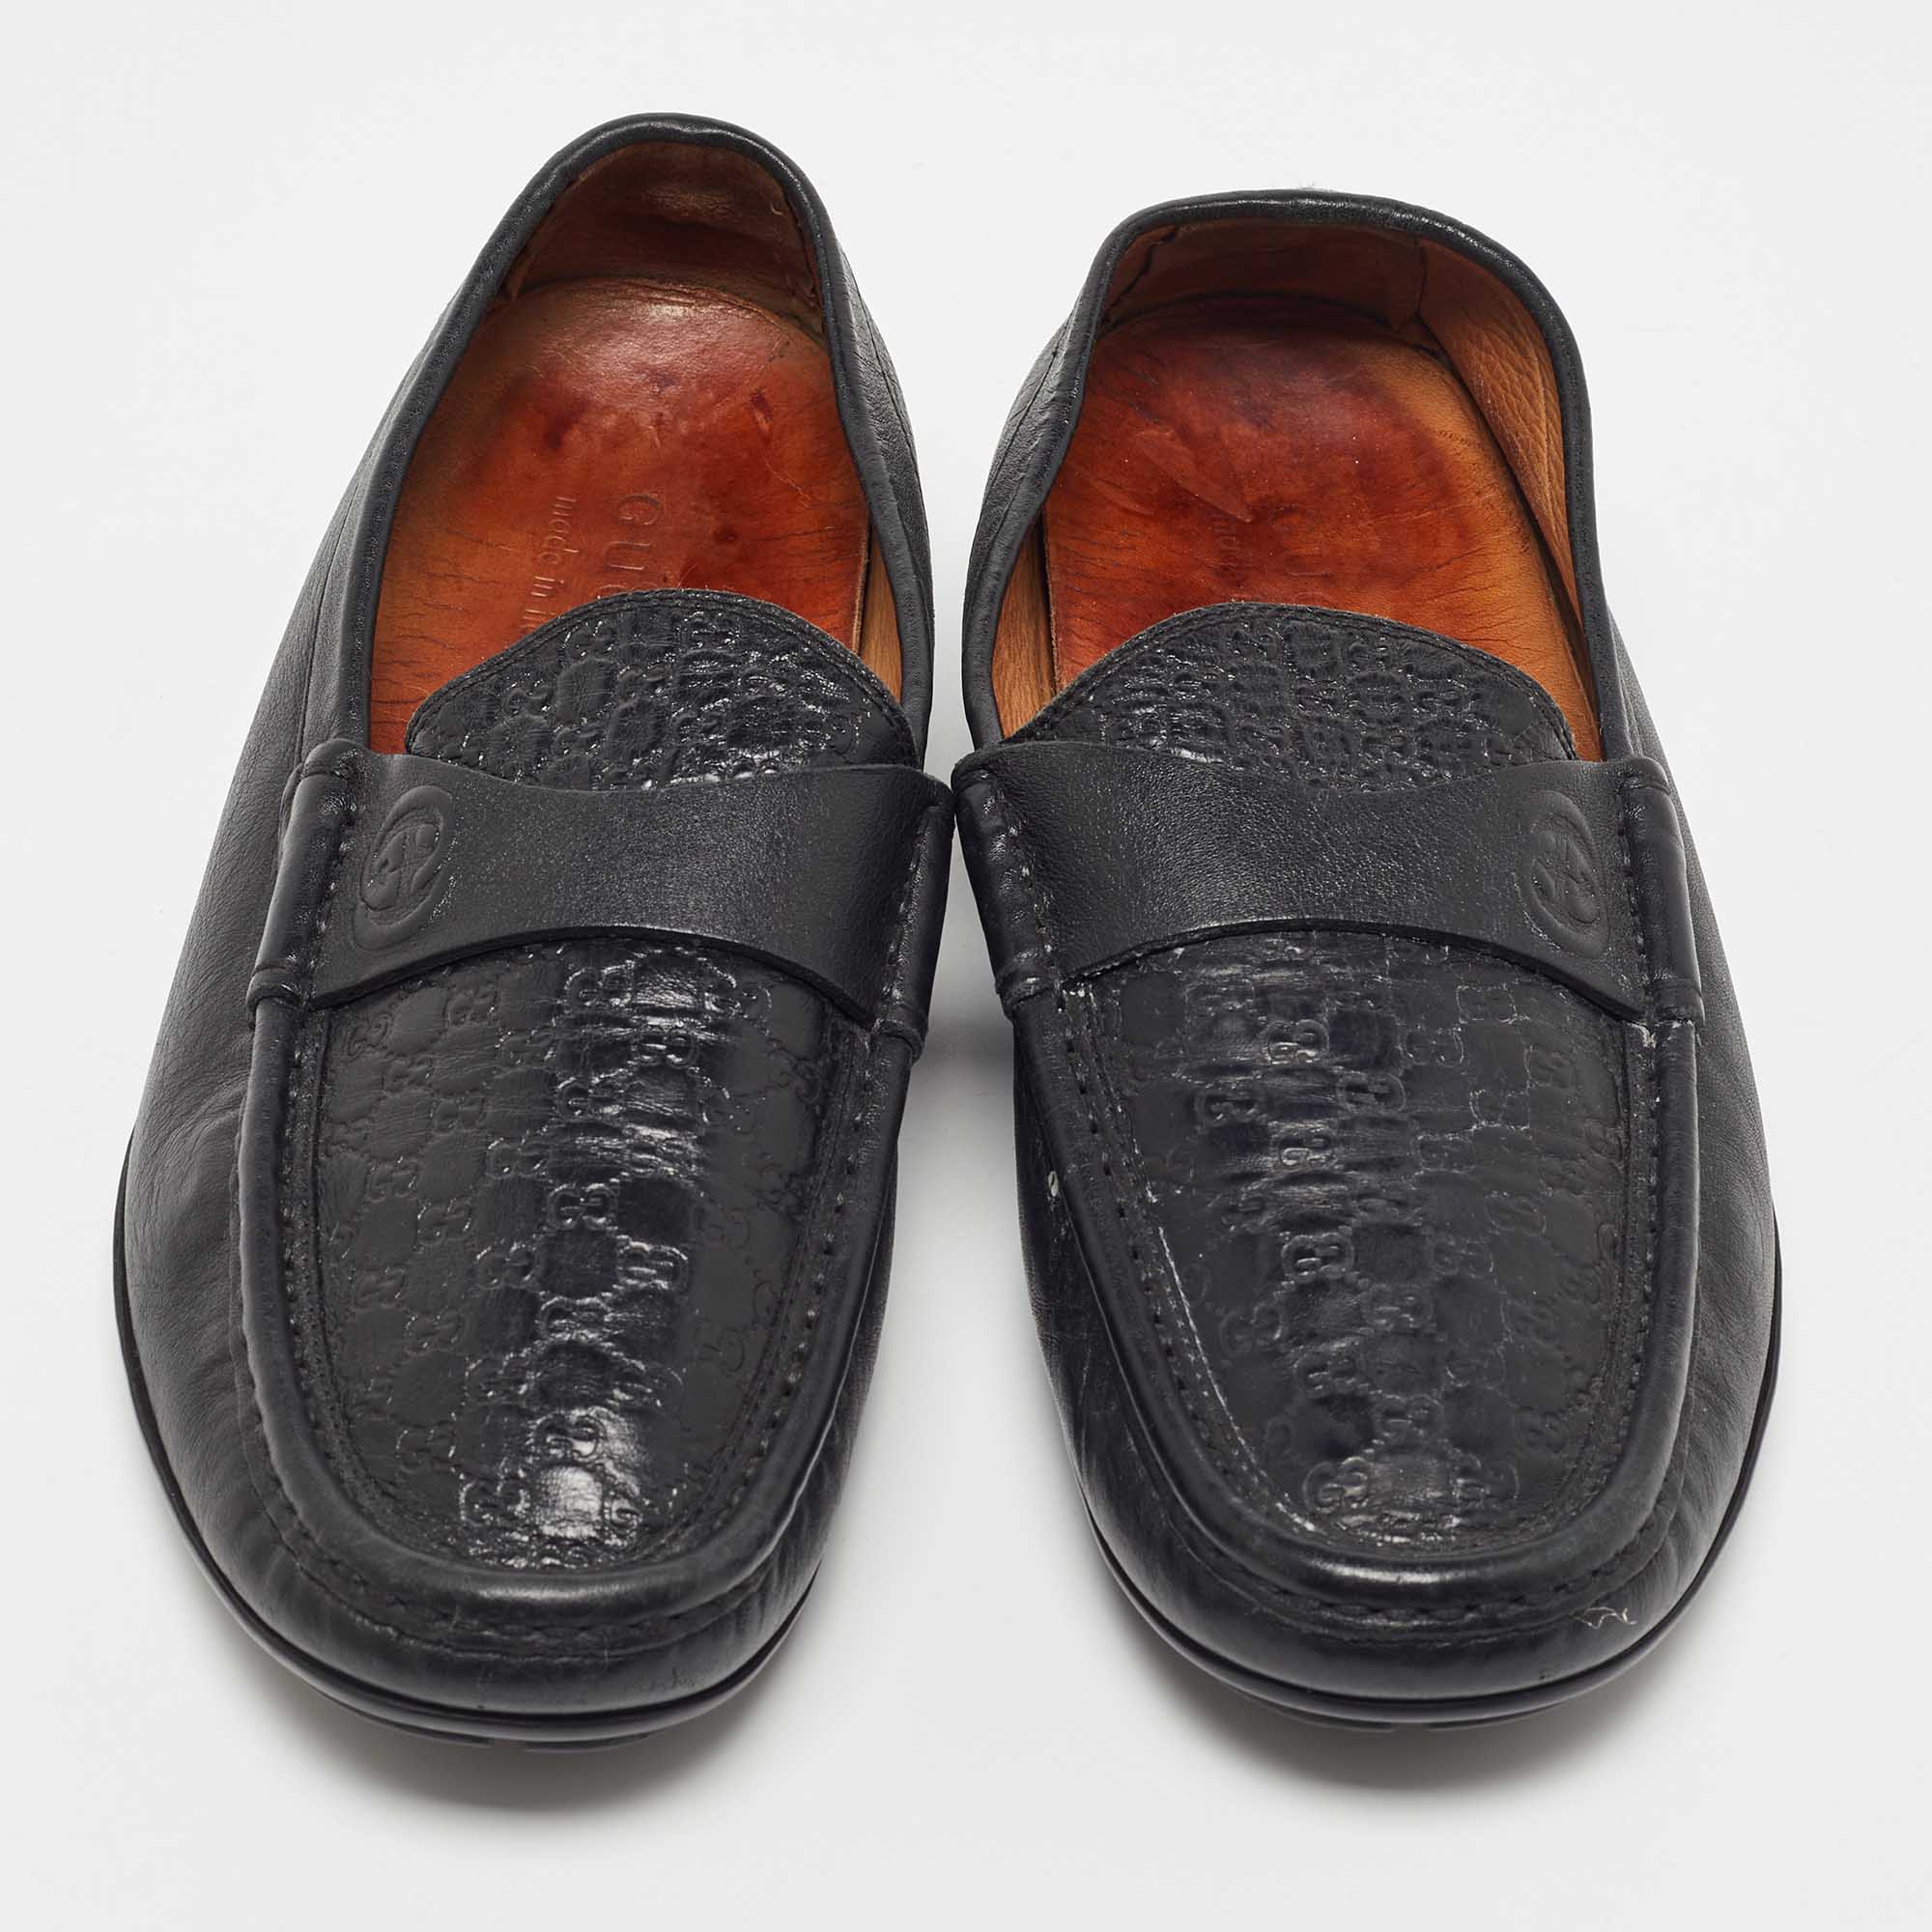 Gucci Black Microguccissima Leather Slip On Loafers Size 40.5